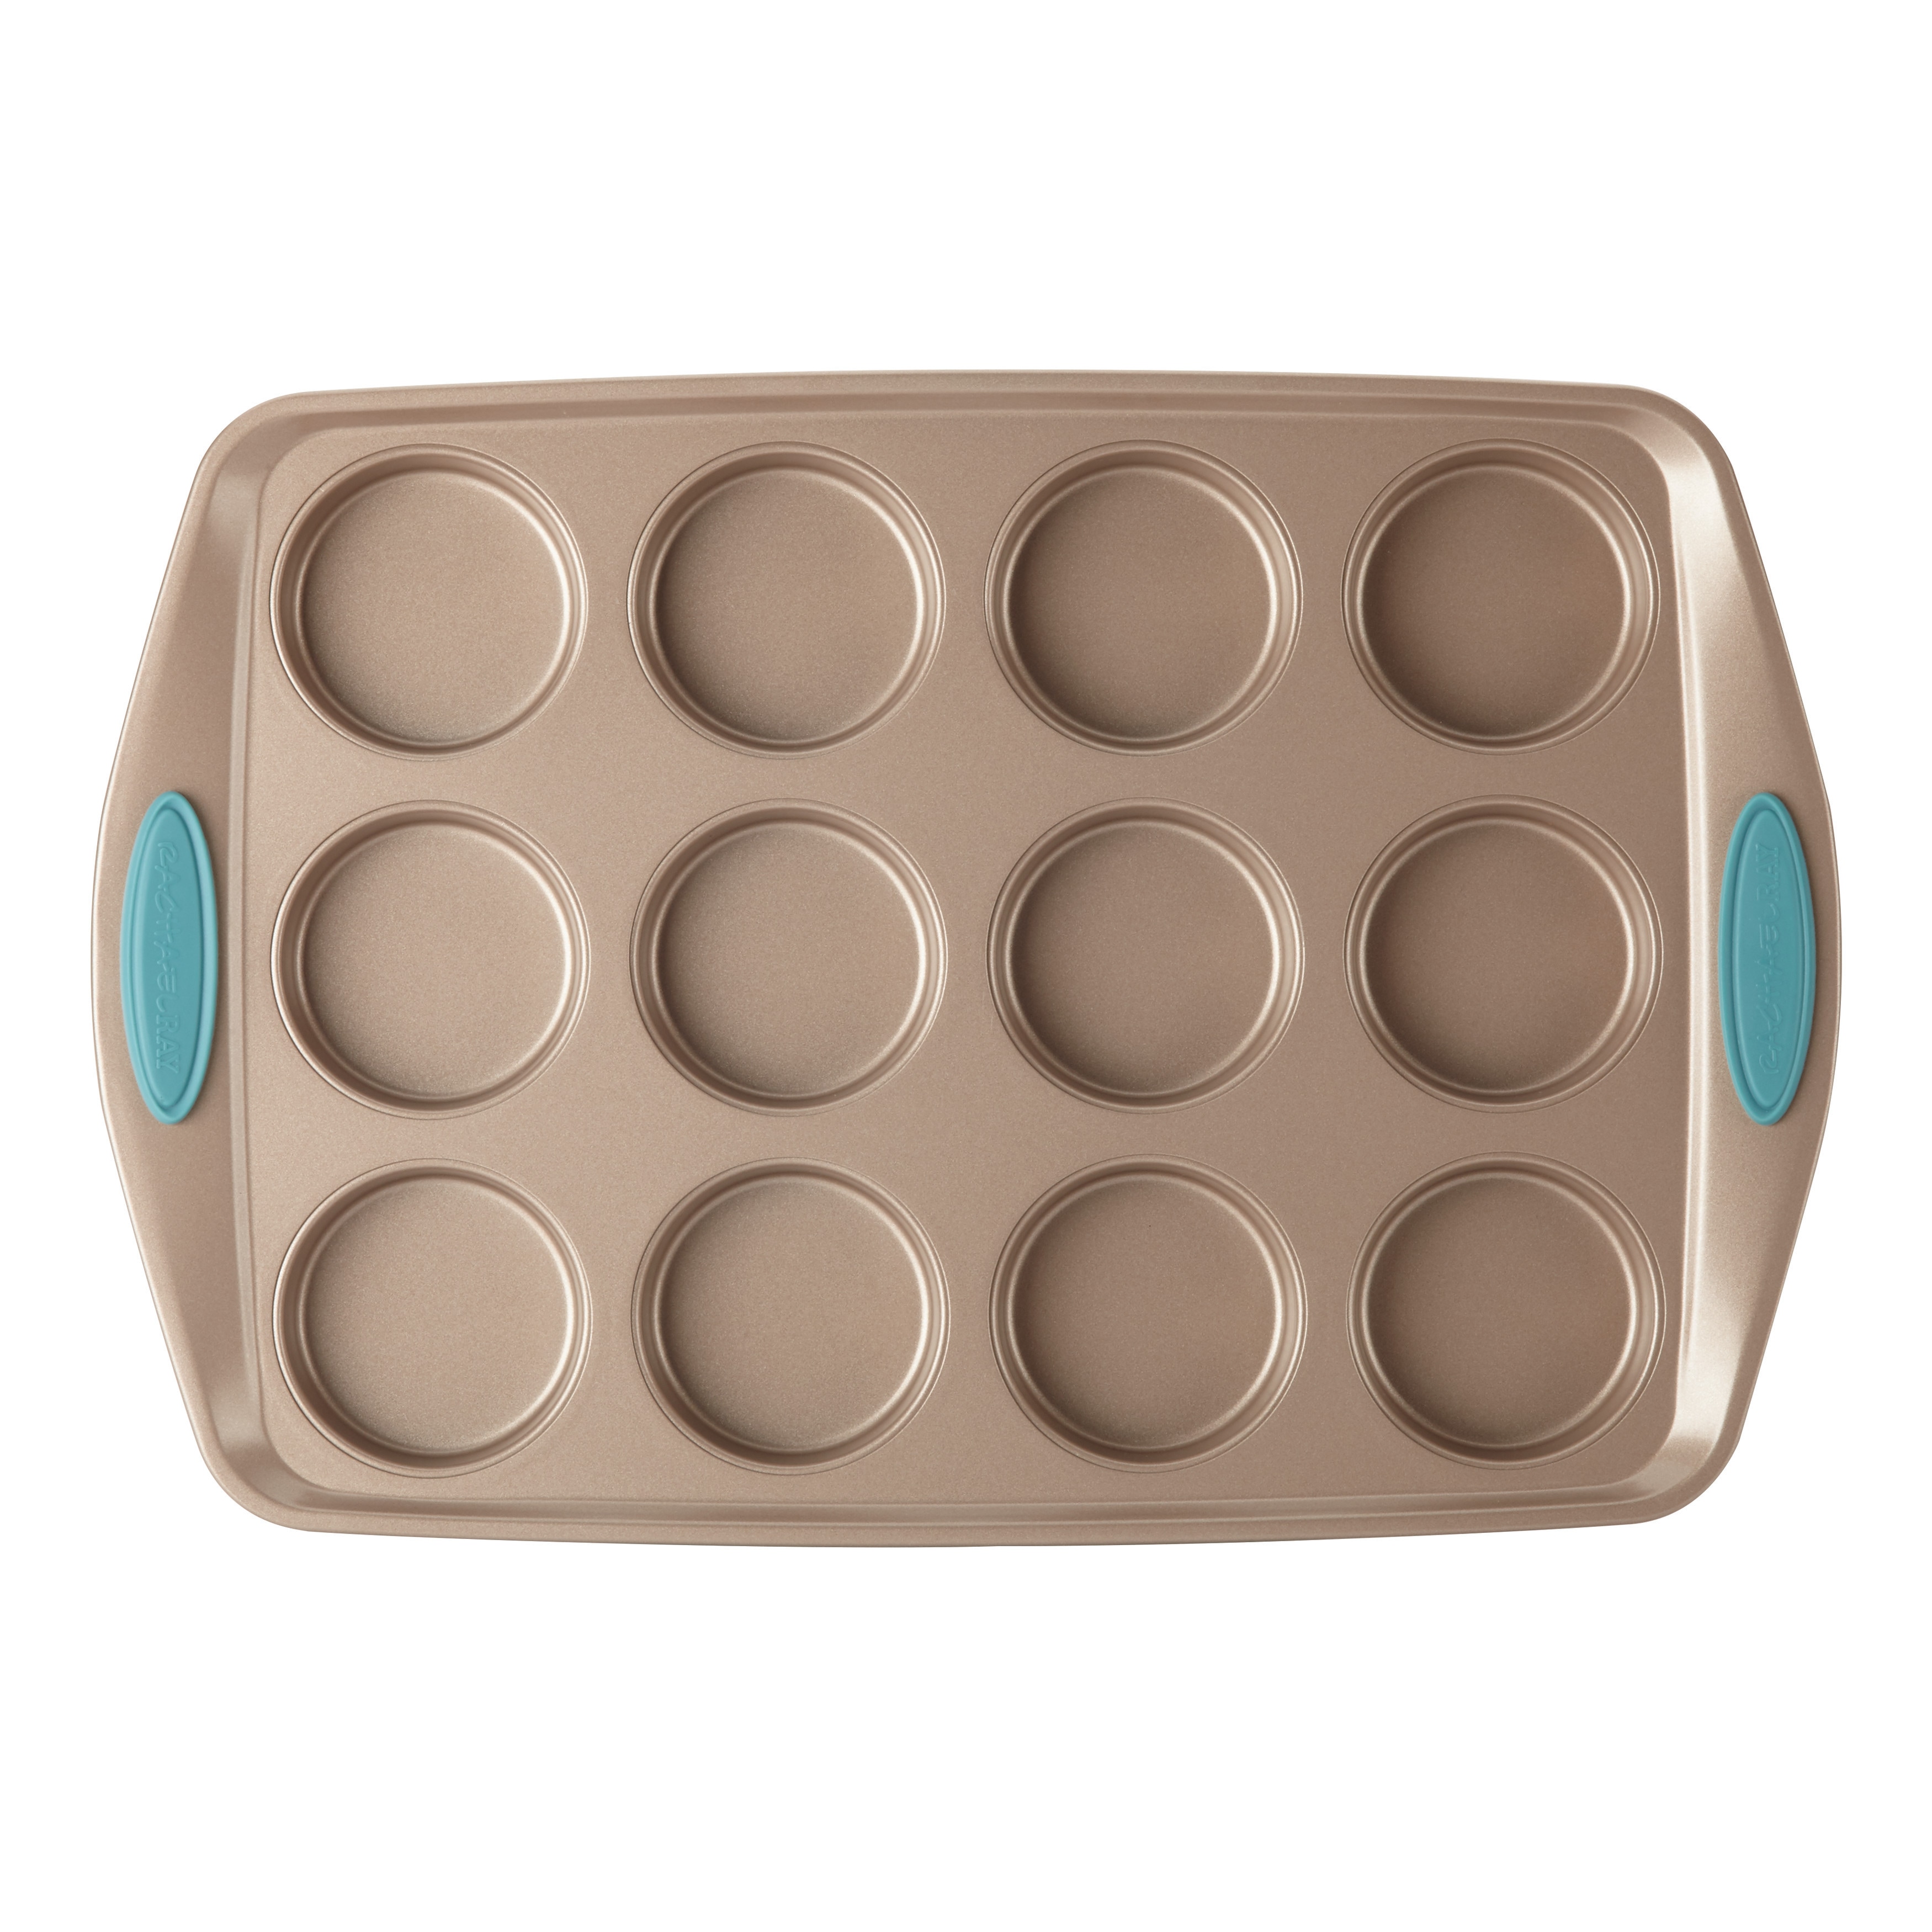 https://ak1.ostkcdn.com/images/products/13219274/Rachael-Ray-Cucina-Nonstick-Bakeware-12-Cup-Muffin-Cupcake-Pan-Latte-Brown-Agave-Blue-Handle-Grips-f339639f-18a2-4812-a000-06486527f0ab.jpg